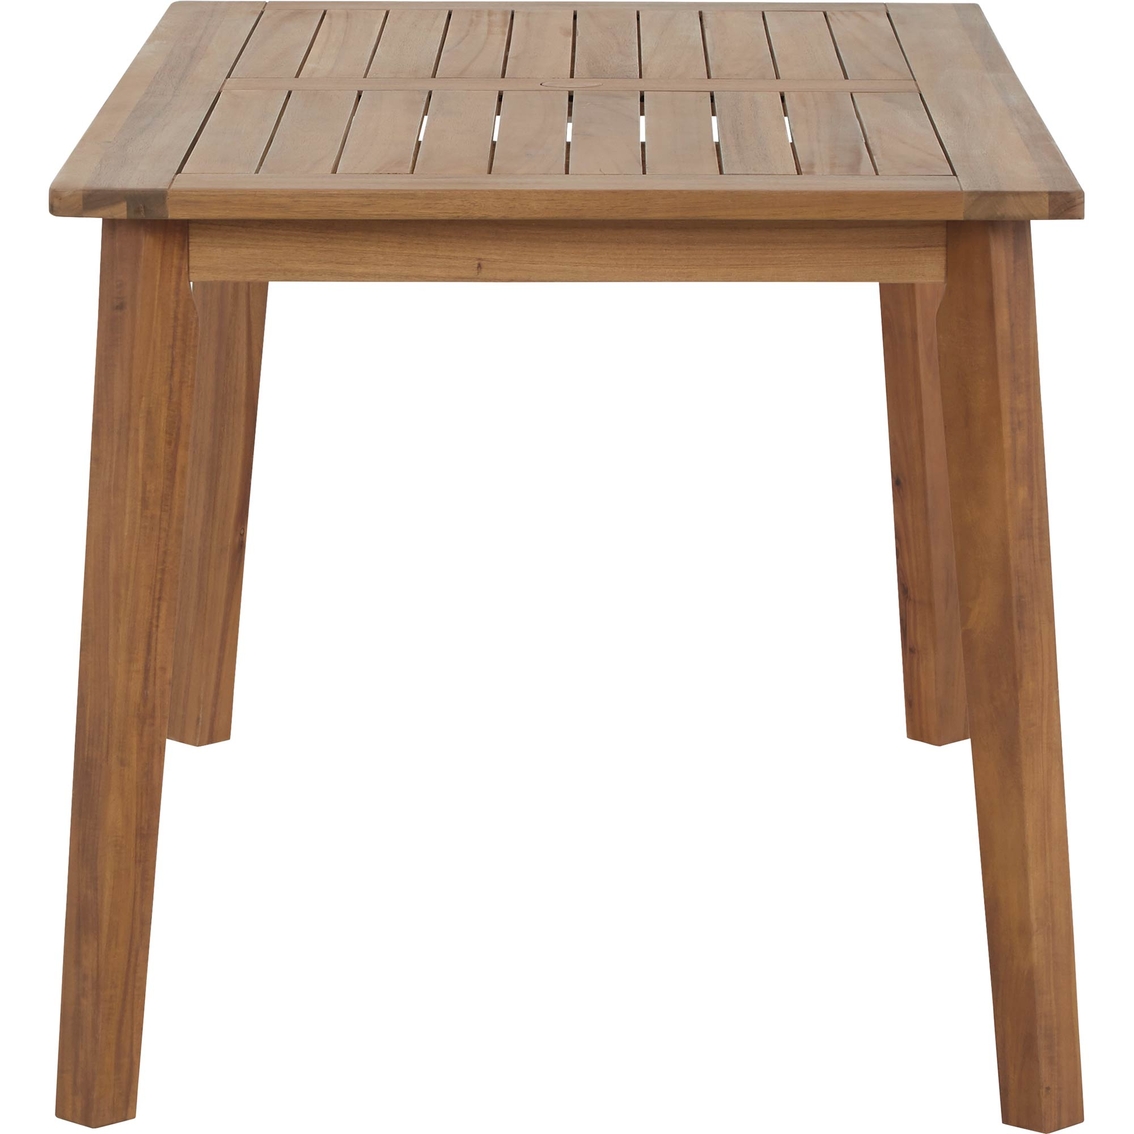 Signature Design by Ashley Janiyah Outdoor Rectangular Dining Table - Image 2 of 6